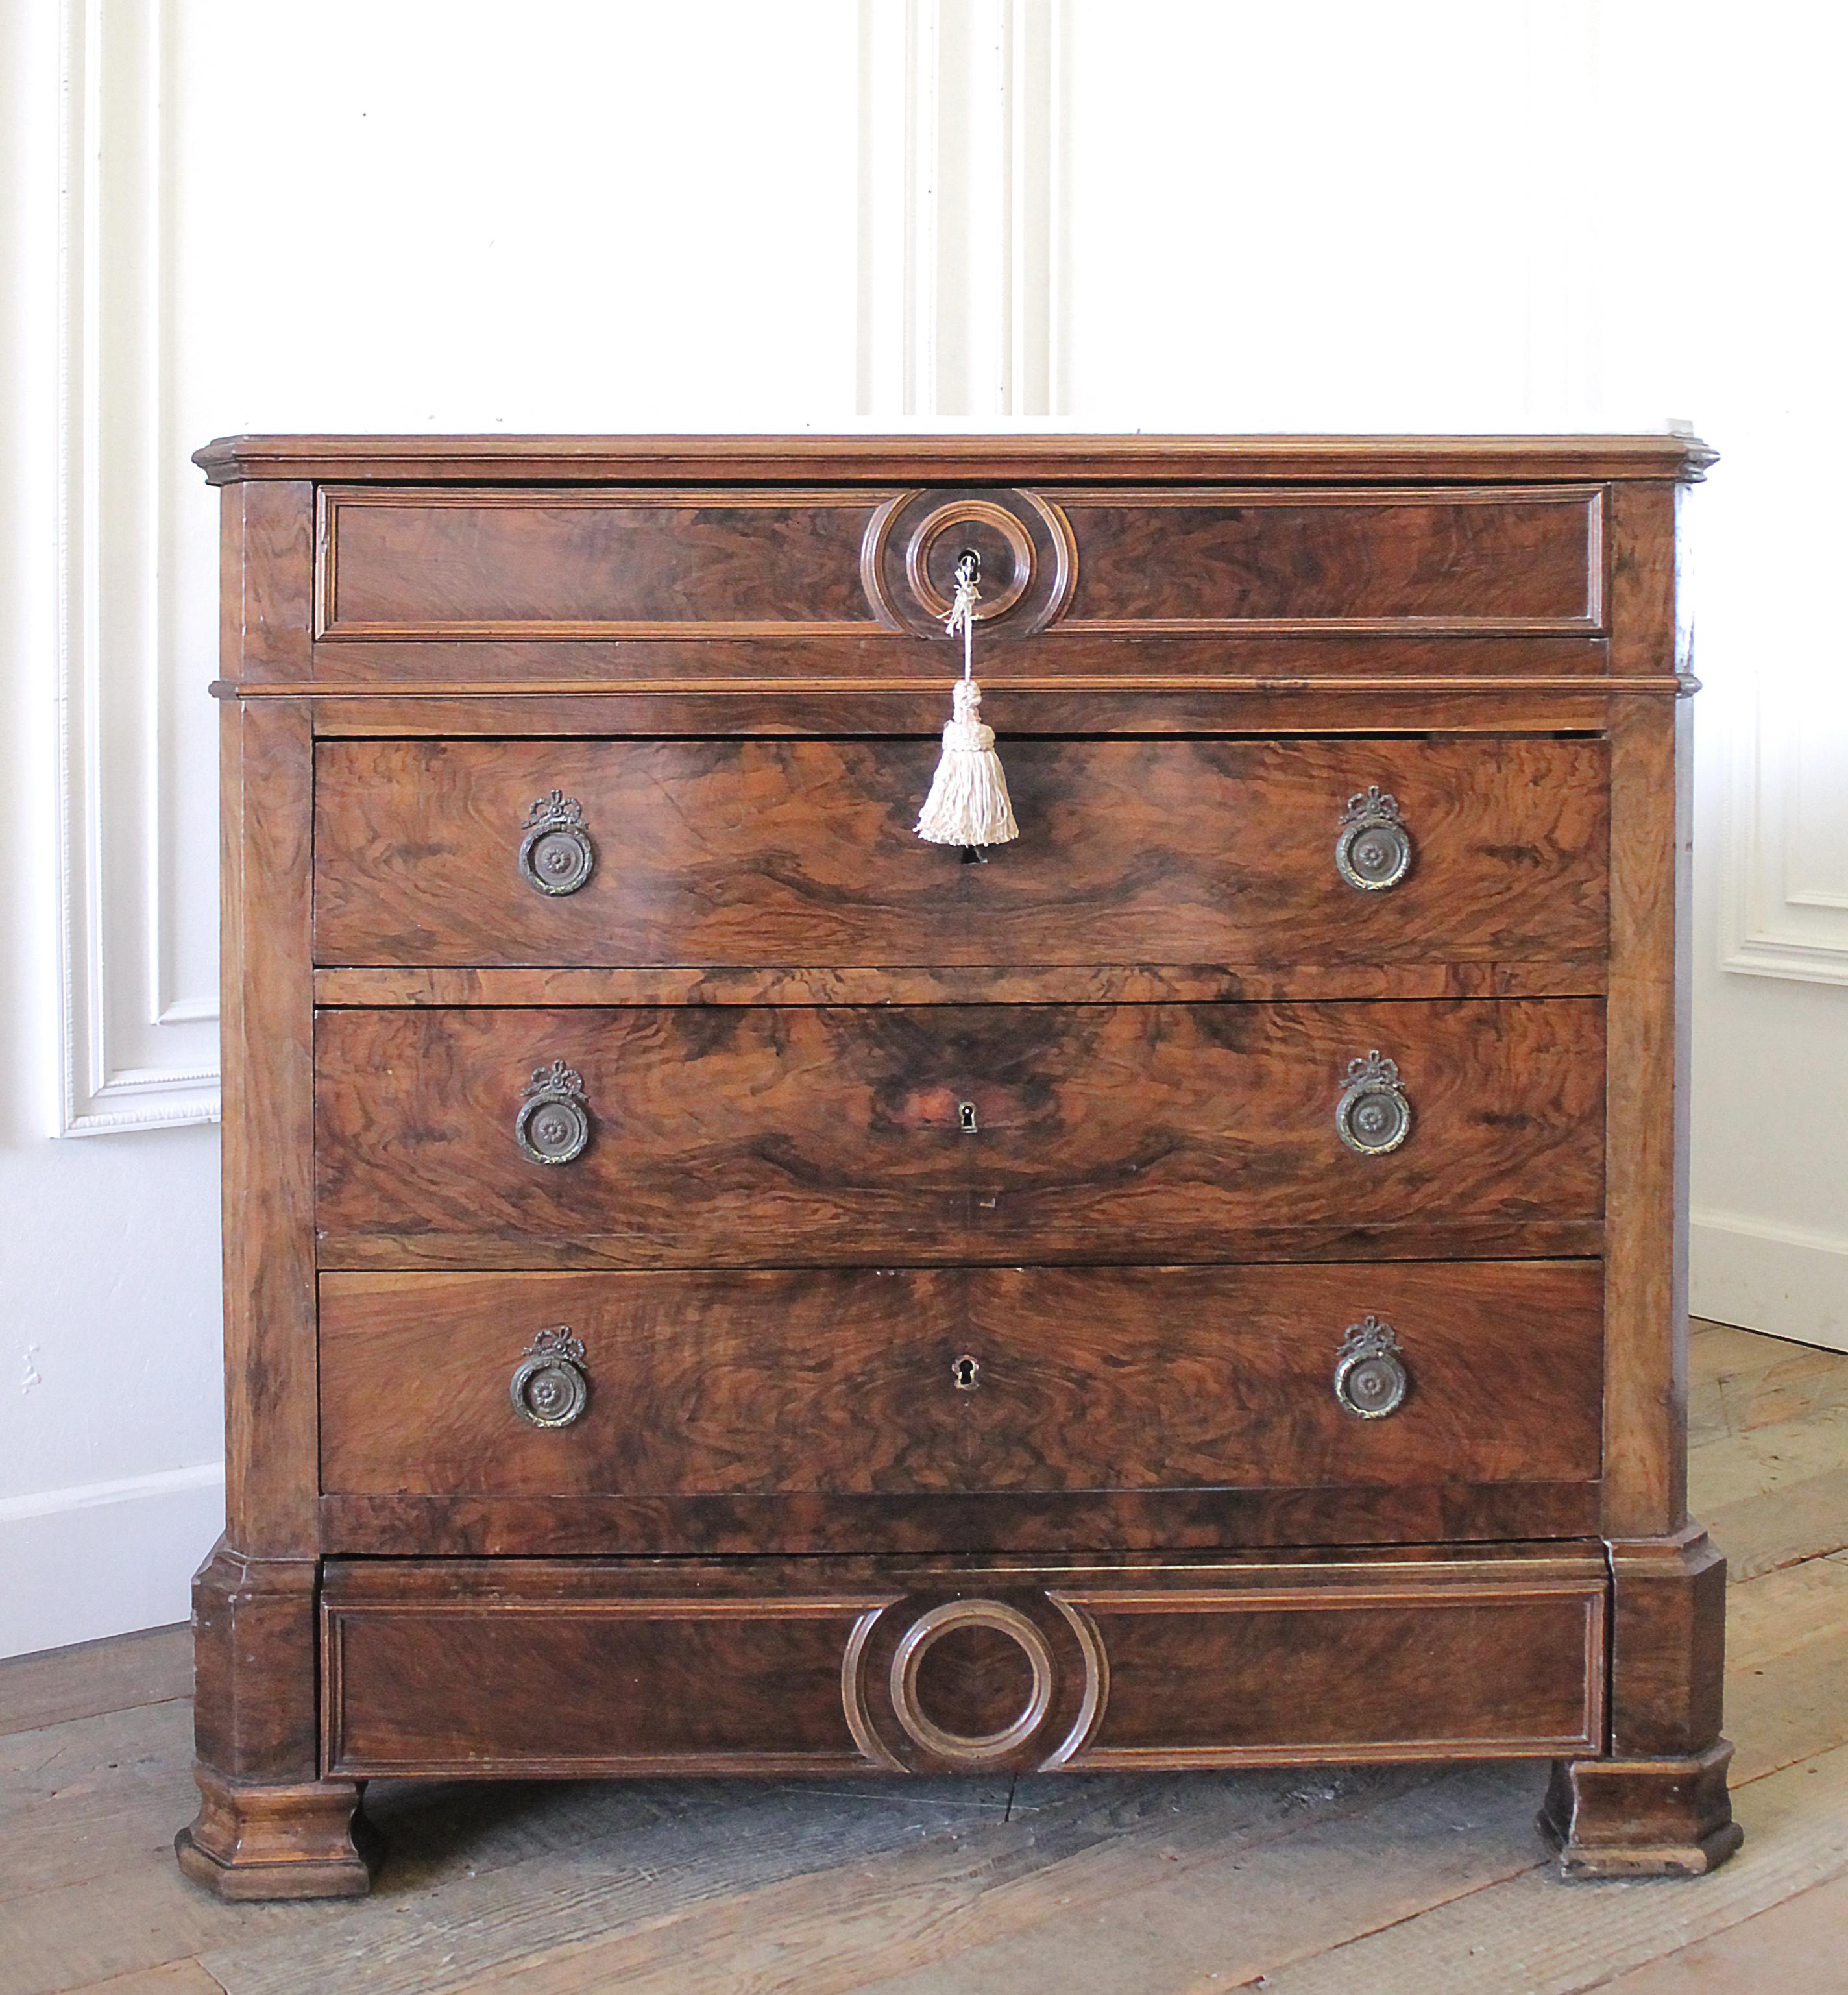 European 19th Century Inlay Empire Style Chest of Drawers with Marble Top